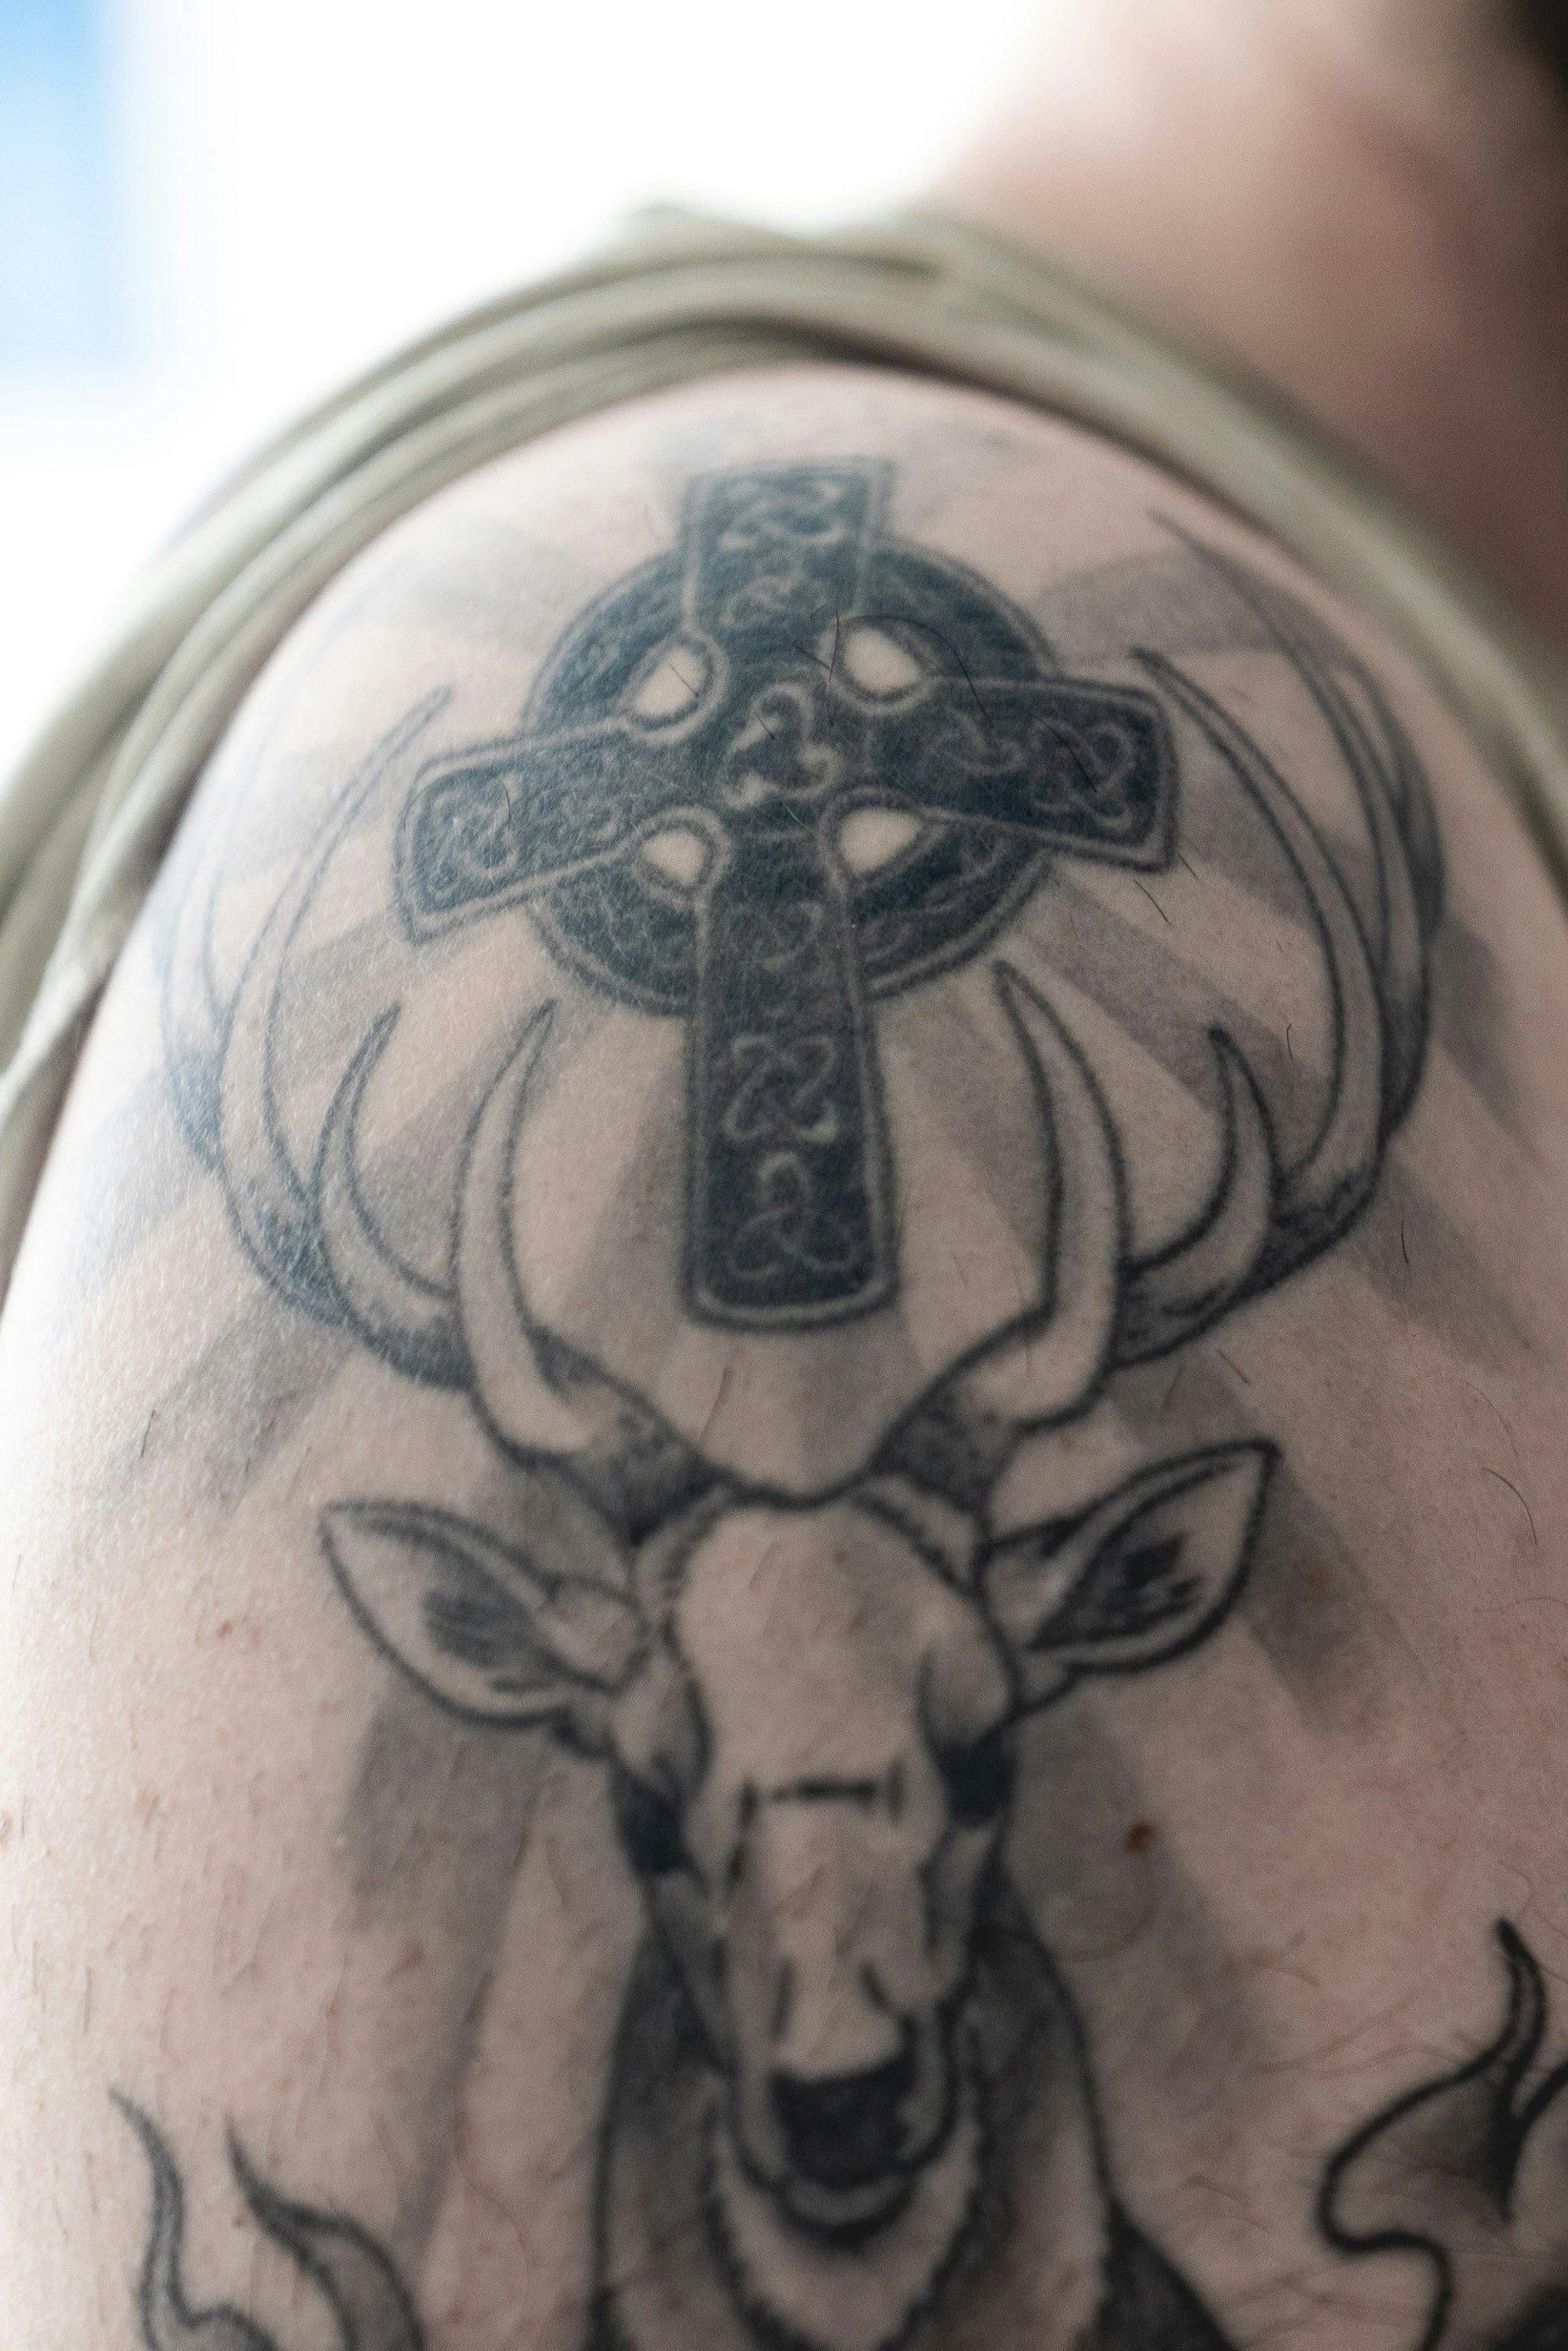 A celtic cross with knotwork on a person's shoulder and upper arm